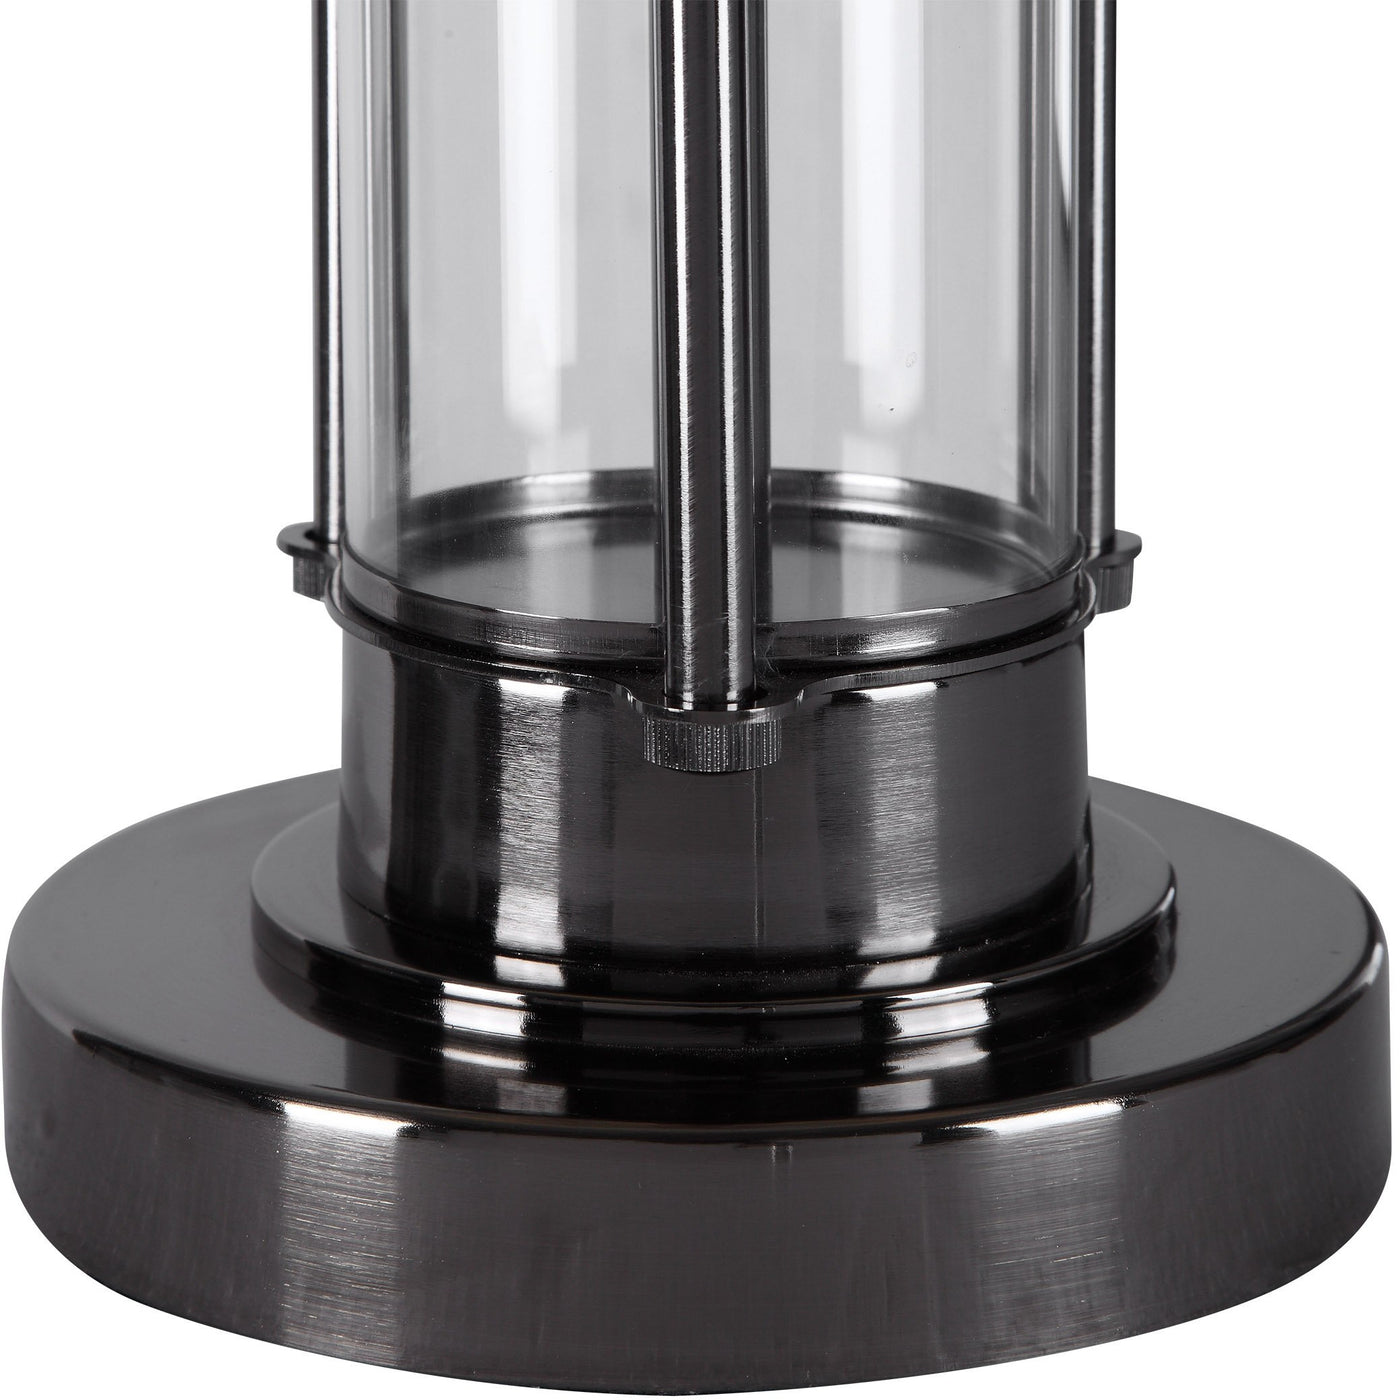 The Murano - Glass Cylinder Table Lamp in Light Black Nickel - Glass.com